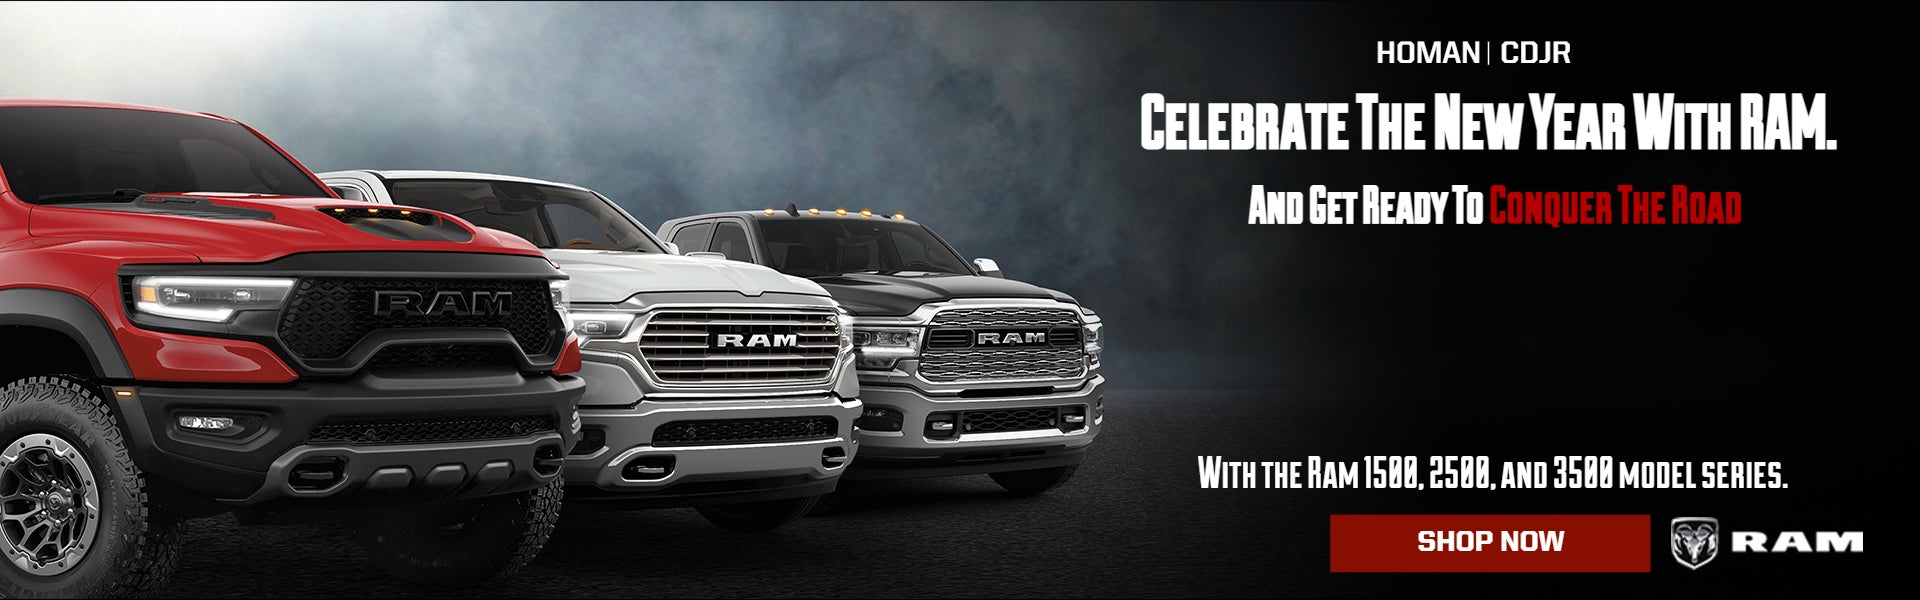 Celebrate The New Year With Ram